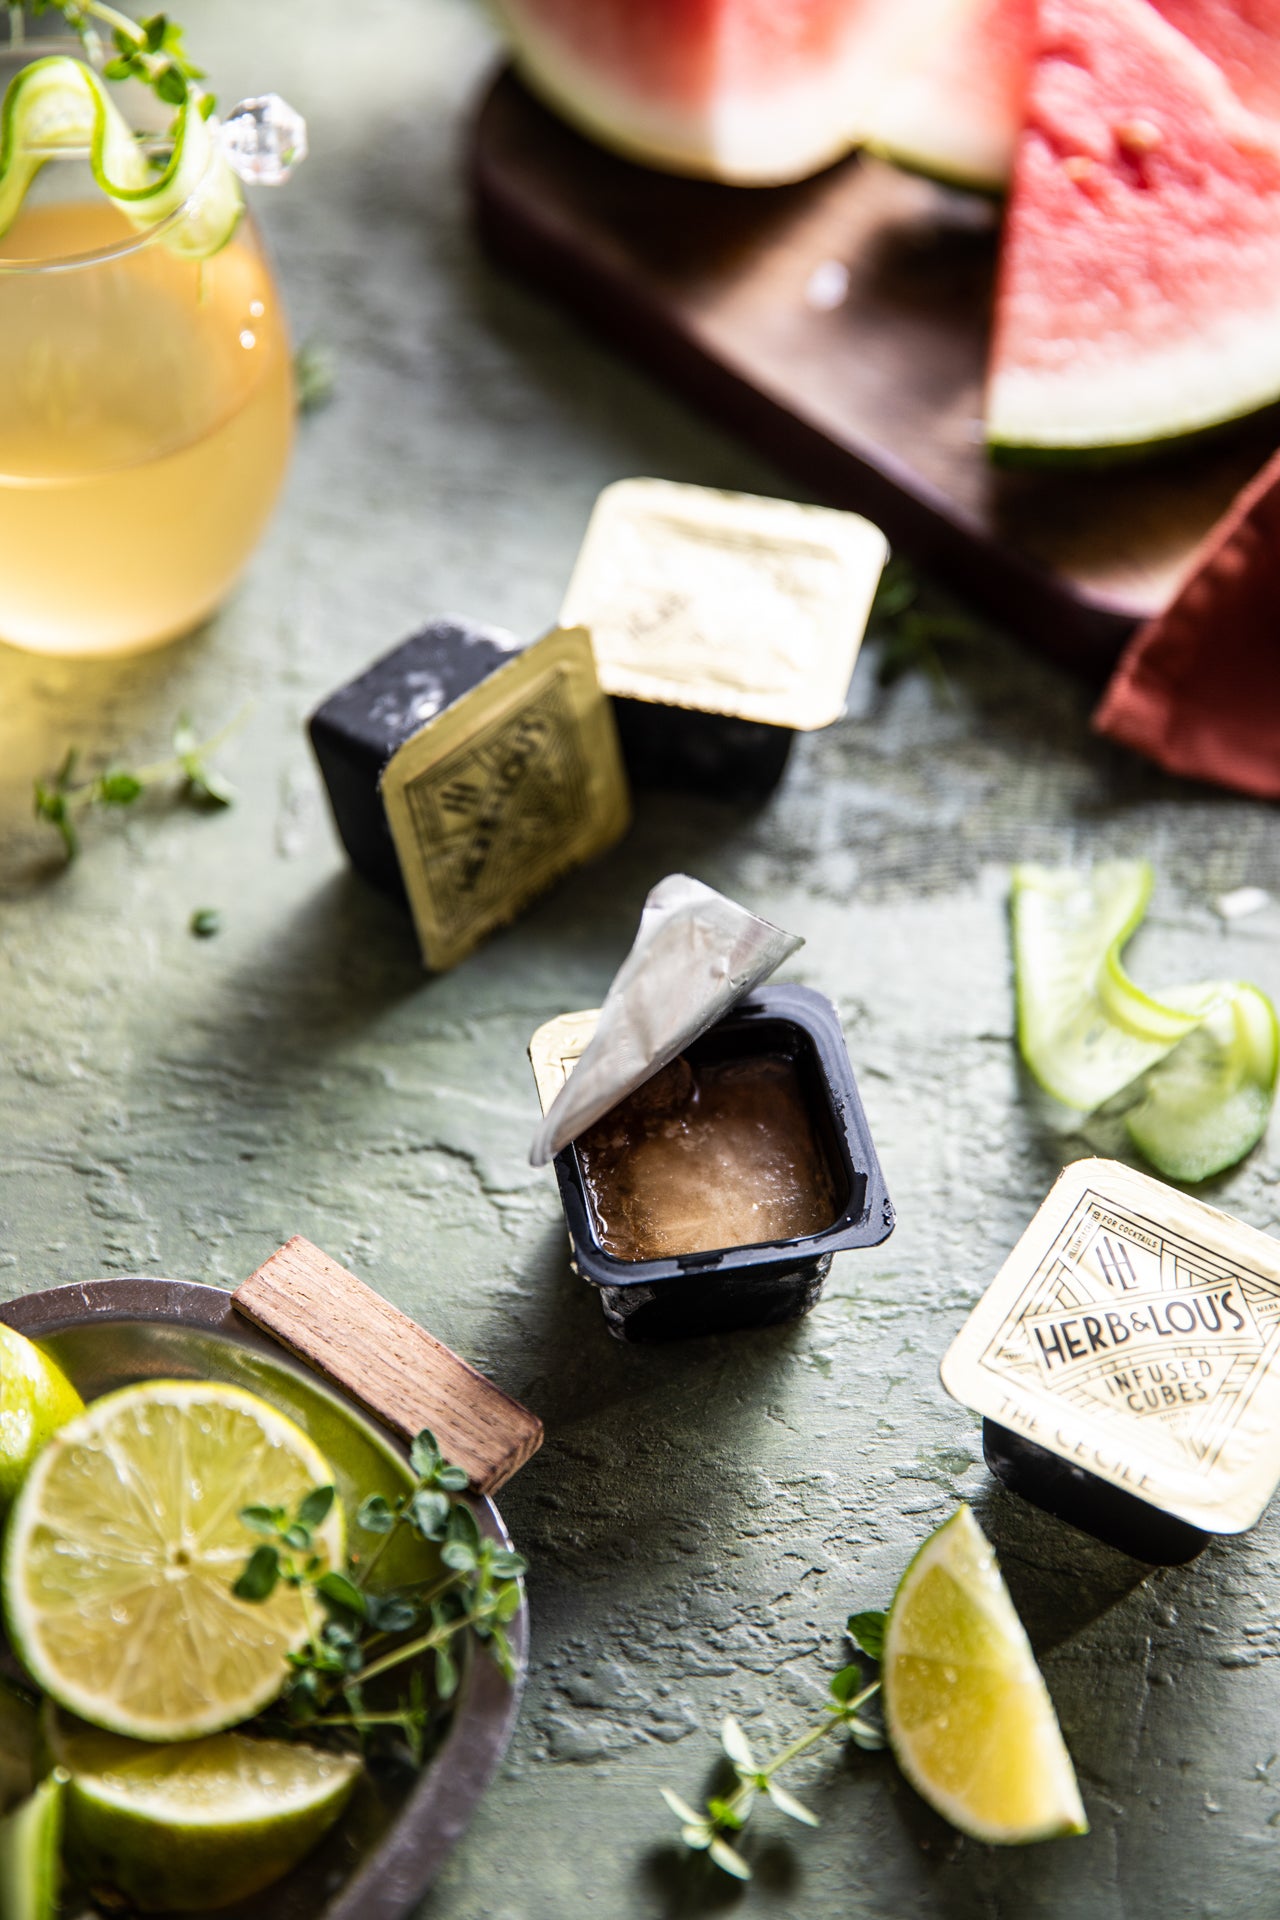 Flavor Infused Ice Cubes Make Cocktails Easy Thanks to Herb & Lou's - The  Manual